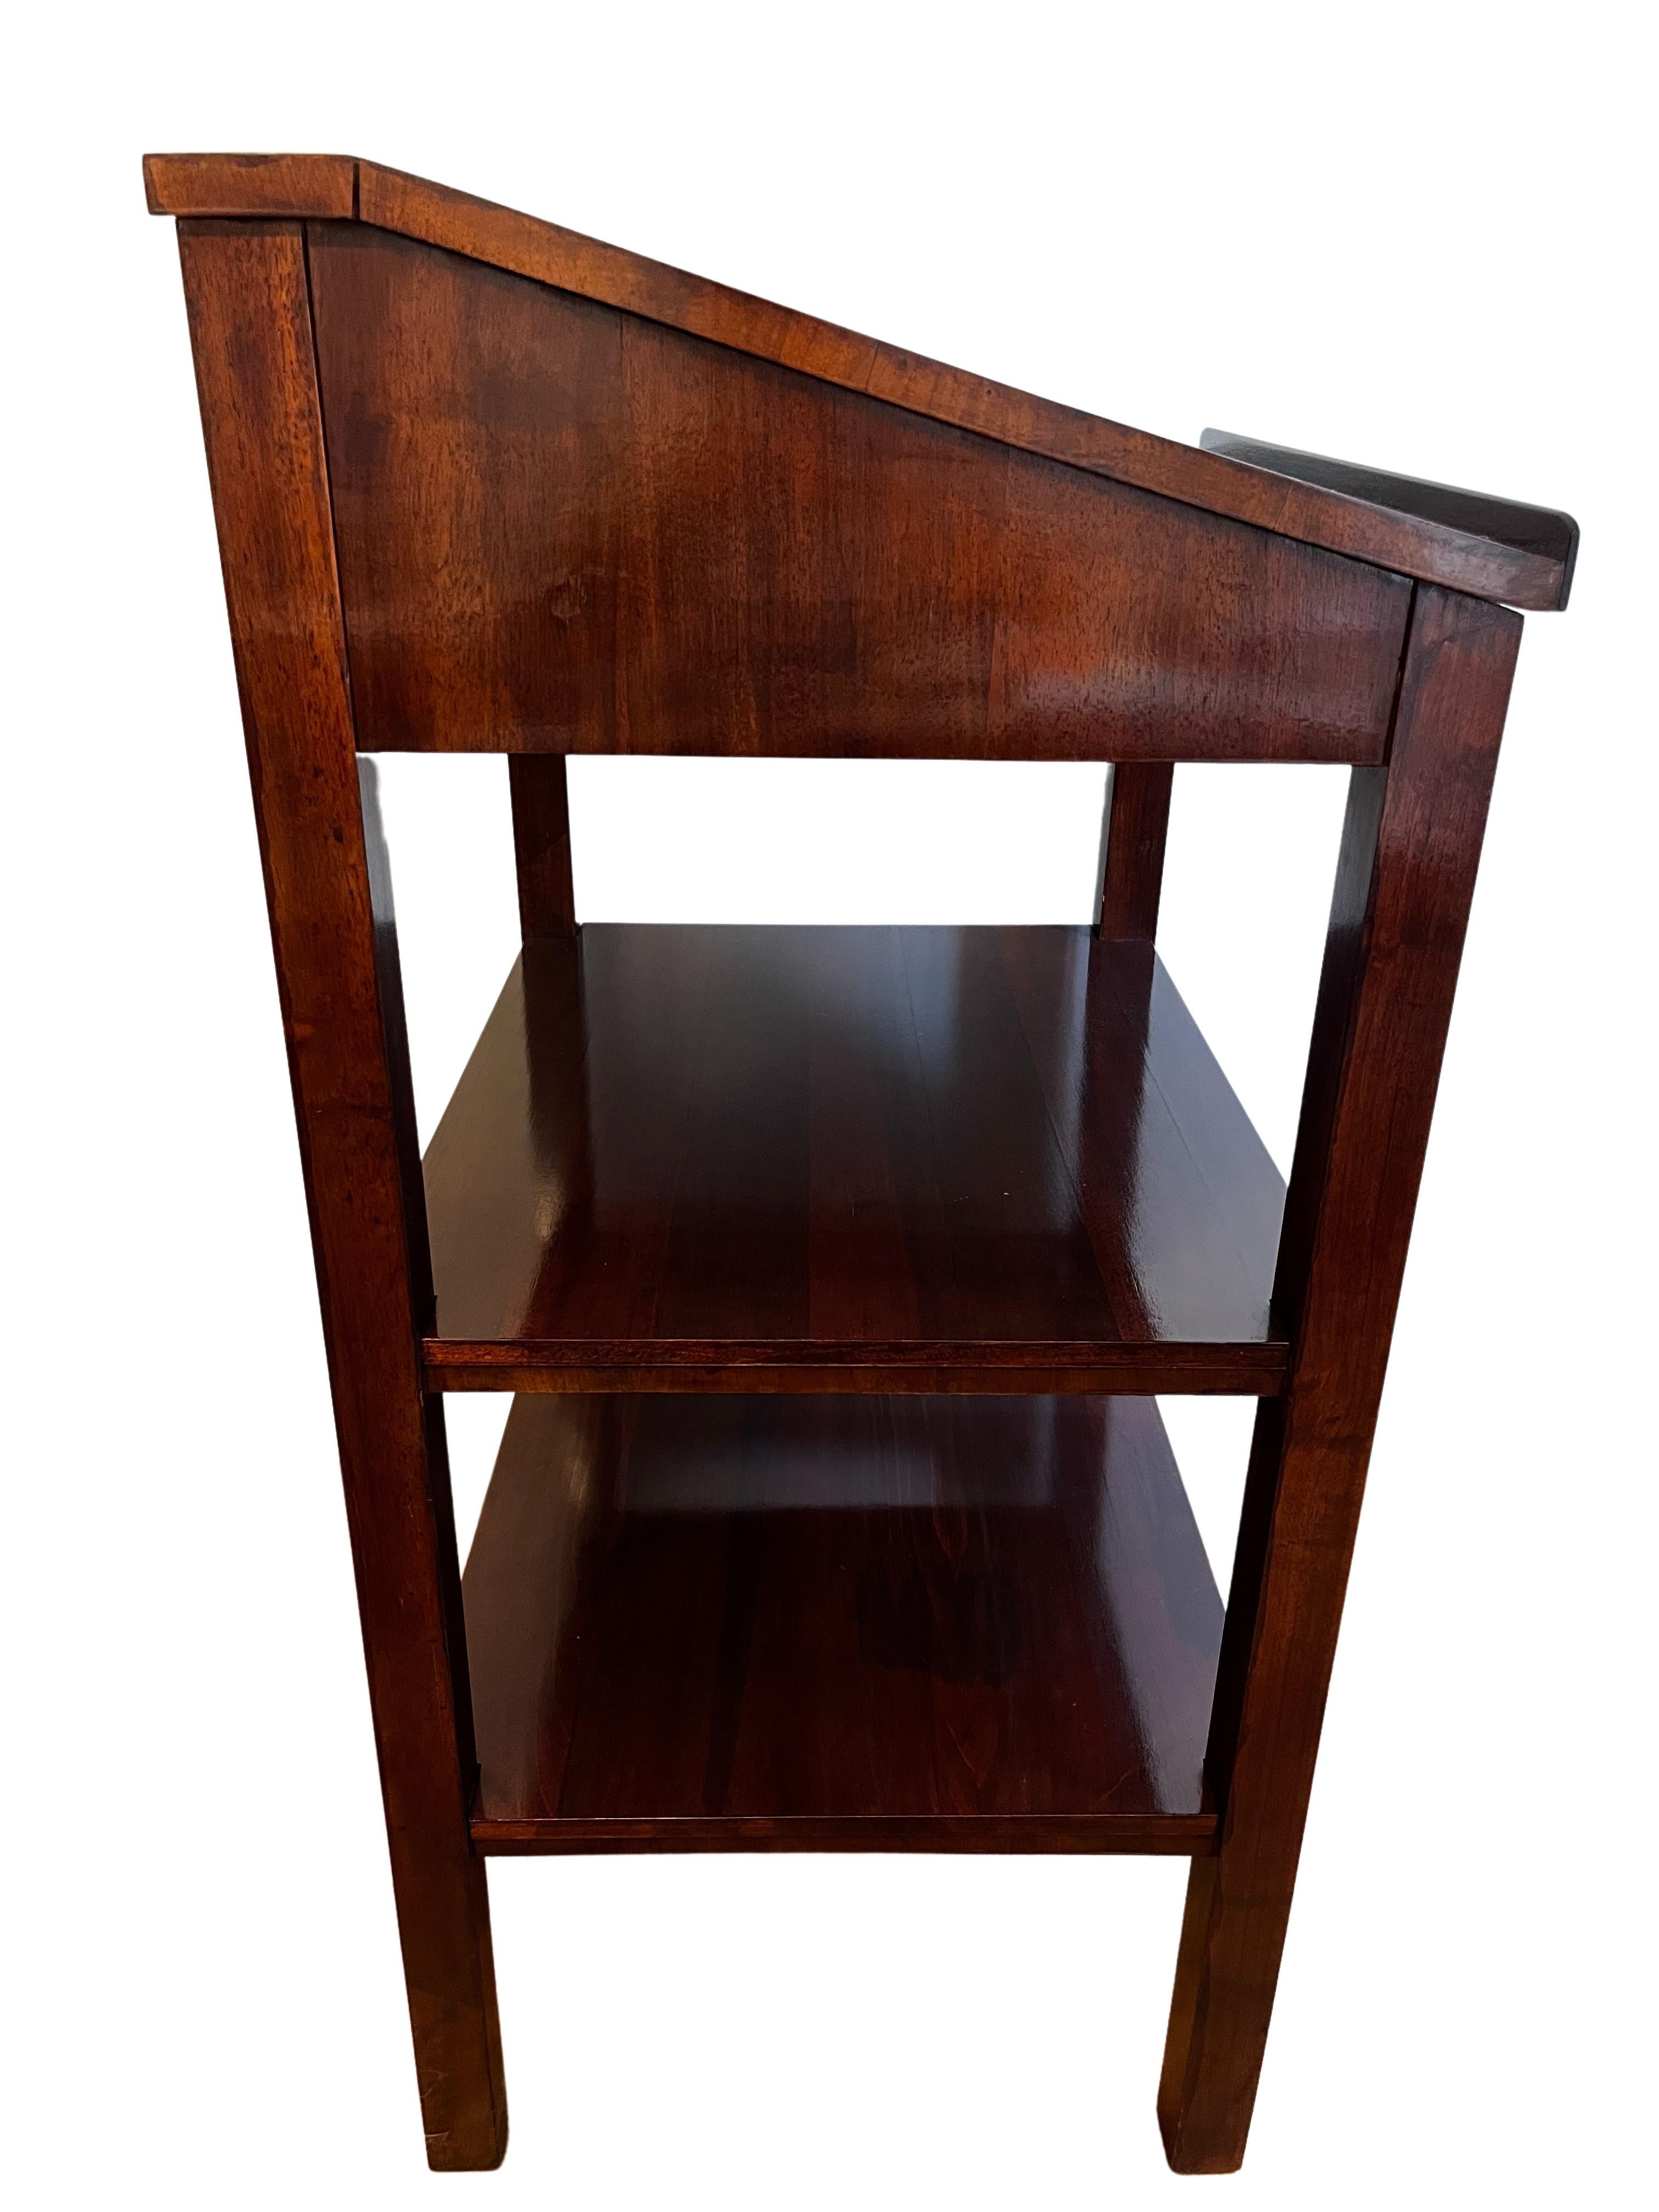 Stunning Lectern, in the Biedermeier style from the end of the 19th century, made around 1870.

A wonderful example of a speaking desk, finished in cherry wood but stained to mahogany. It is built on 3 levels, with 2 shelves and at the top there is